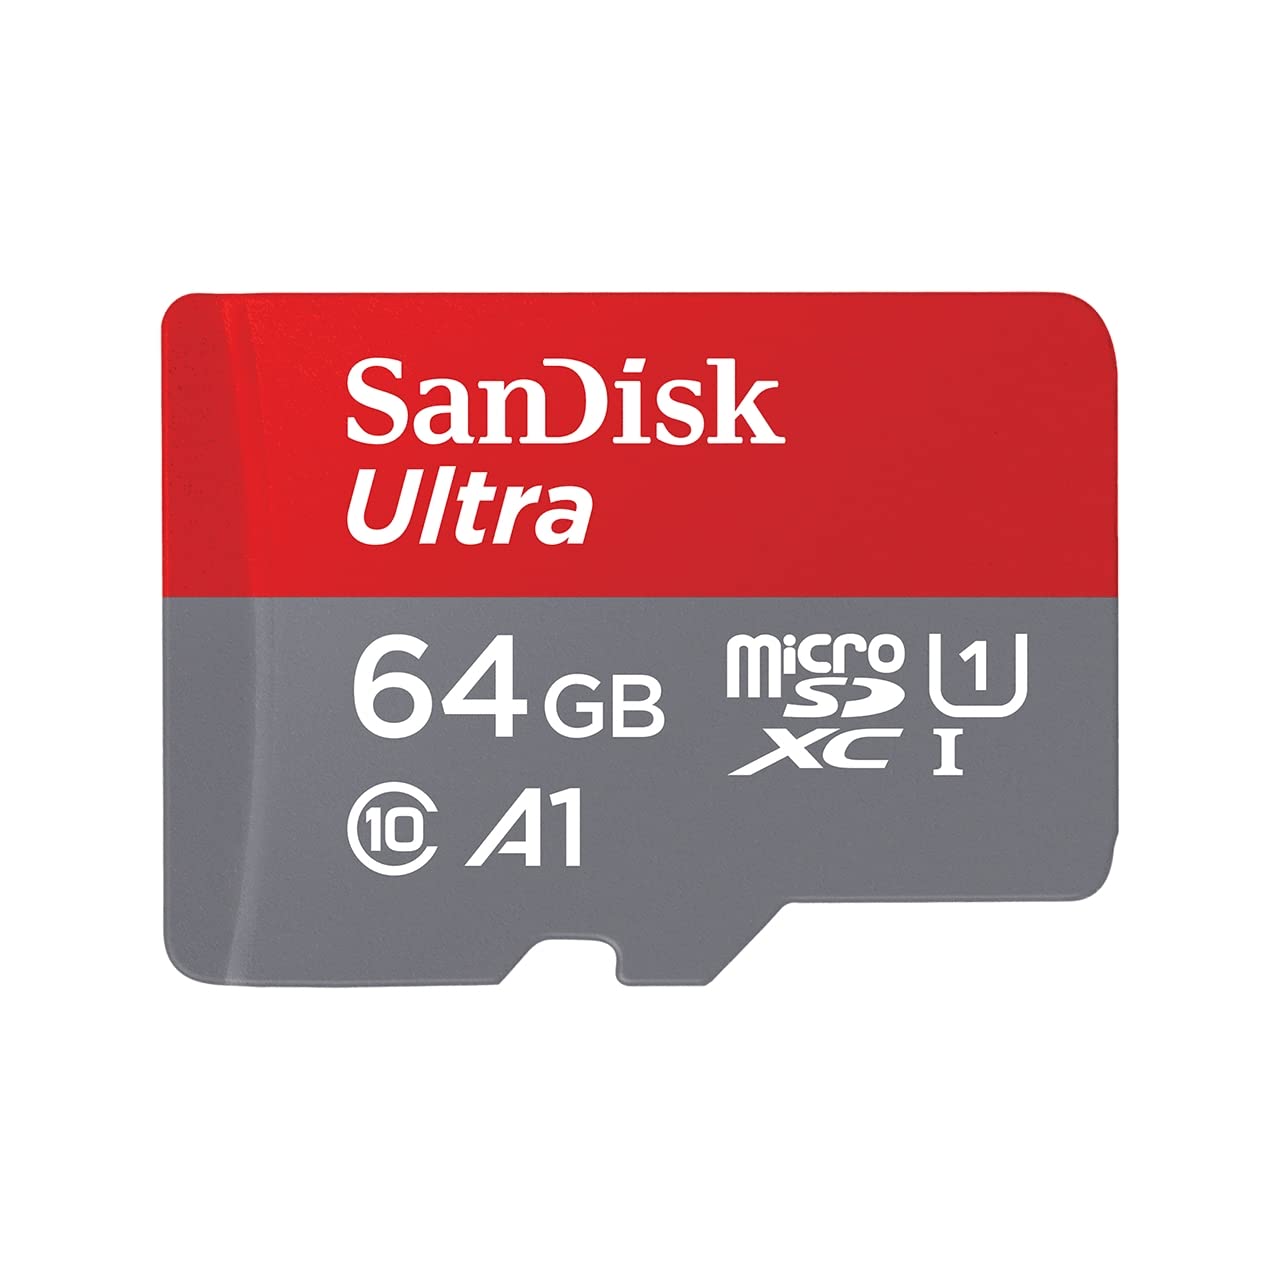 SanDisk 64GB Ultra microSDHC UHS-I Memory Card with Adapter - 120MB/s, C10, U1, Full HD, A1, Micro SD Card - SDSQUA4-064G-GN6MA